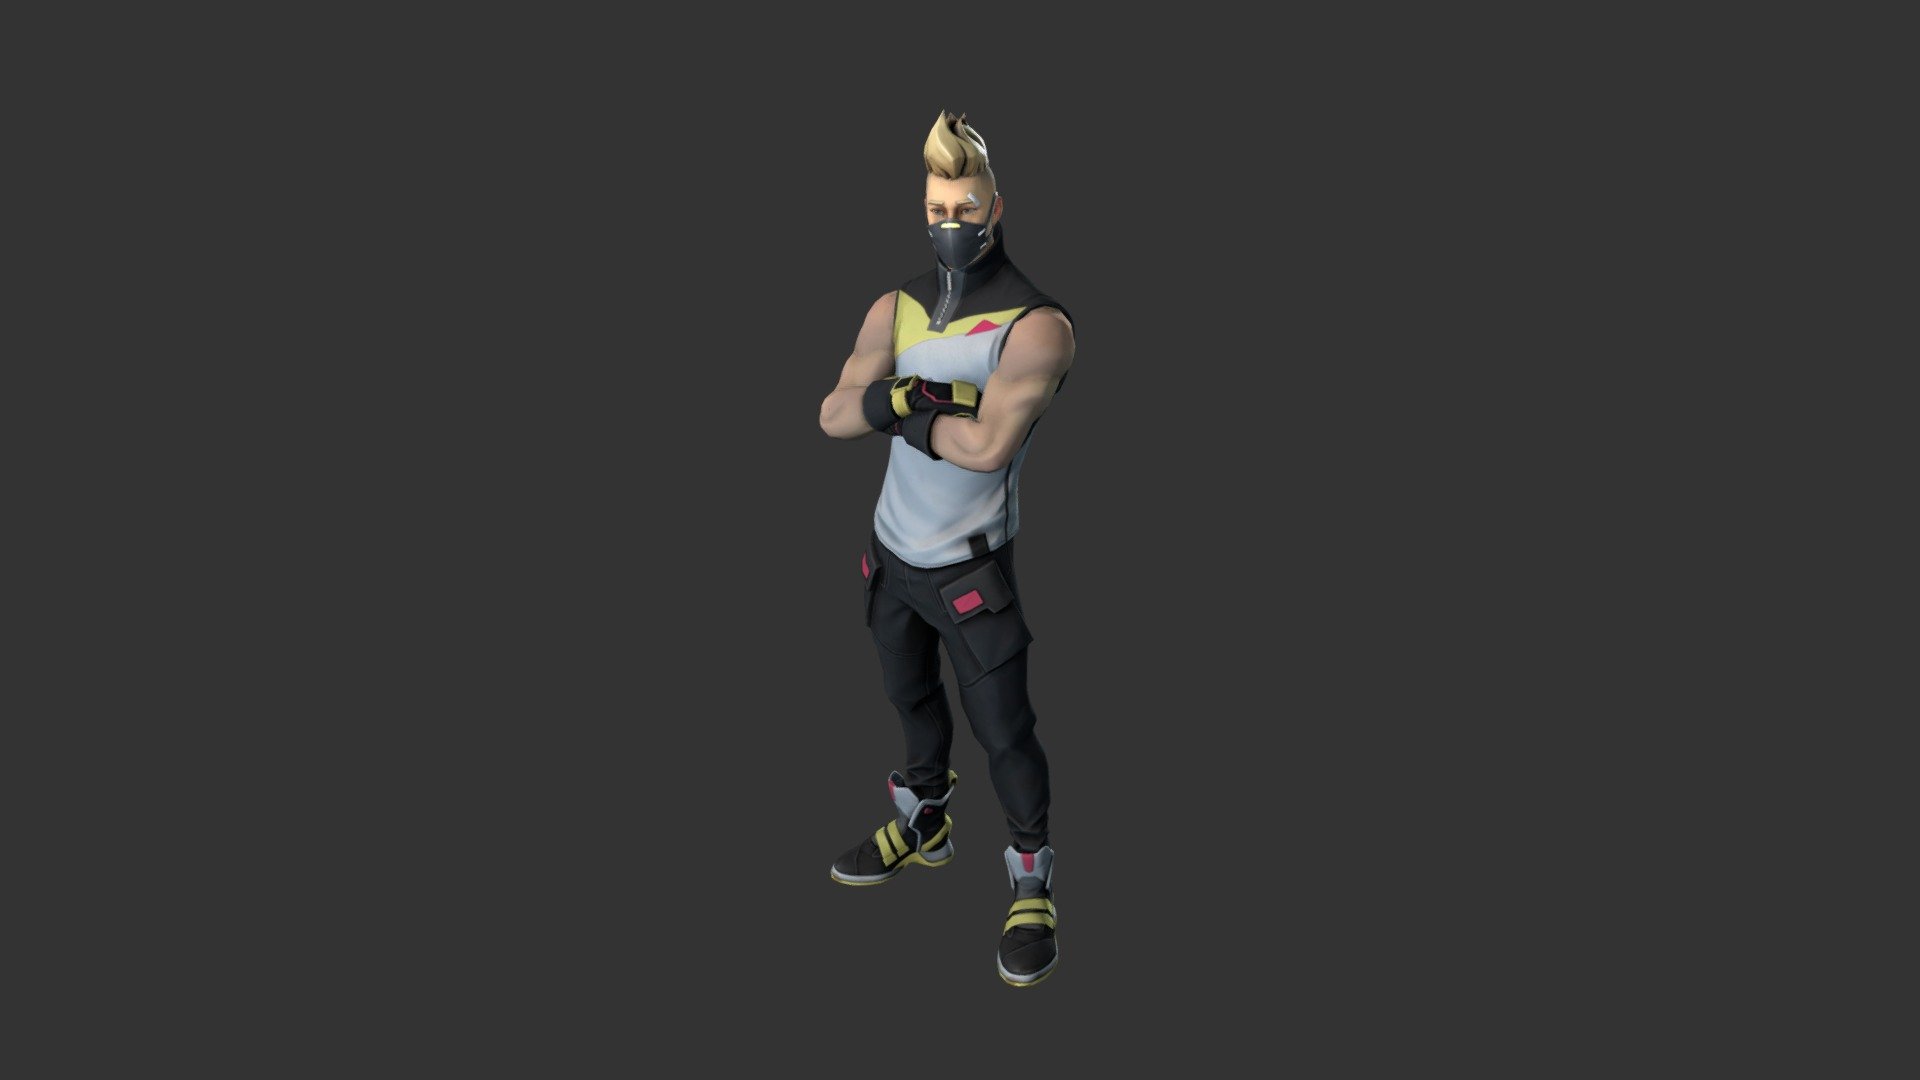 Fortnite Battle Royale Drift Outfit (Stage #1) Outfit Skin - 3D Model Preview

More info: https://fortniteskins.net/outfits/drift/ - Drift Outfit (Stage #1) - 3D model by Fortnite Skins (@fortniteskins) 3d model